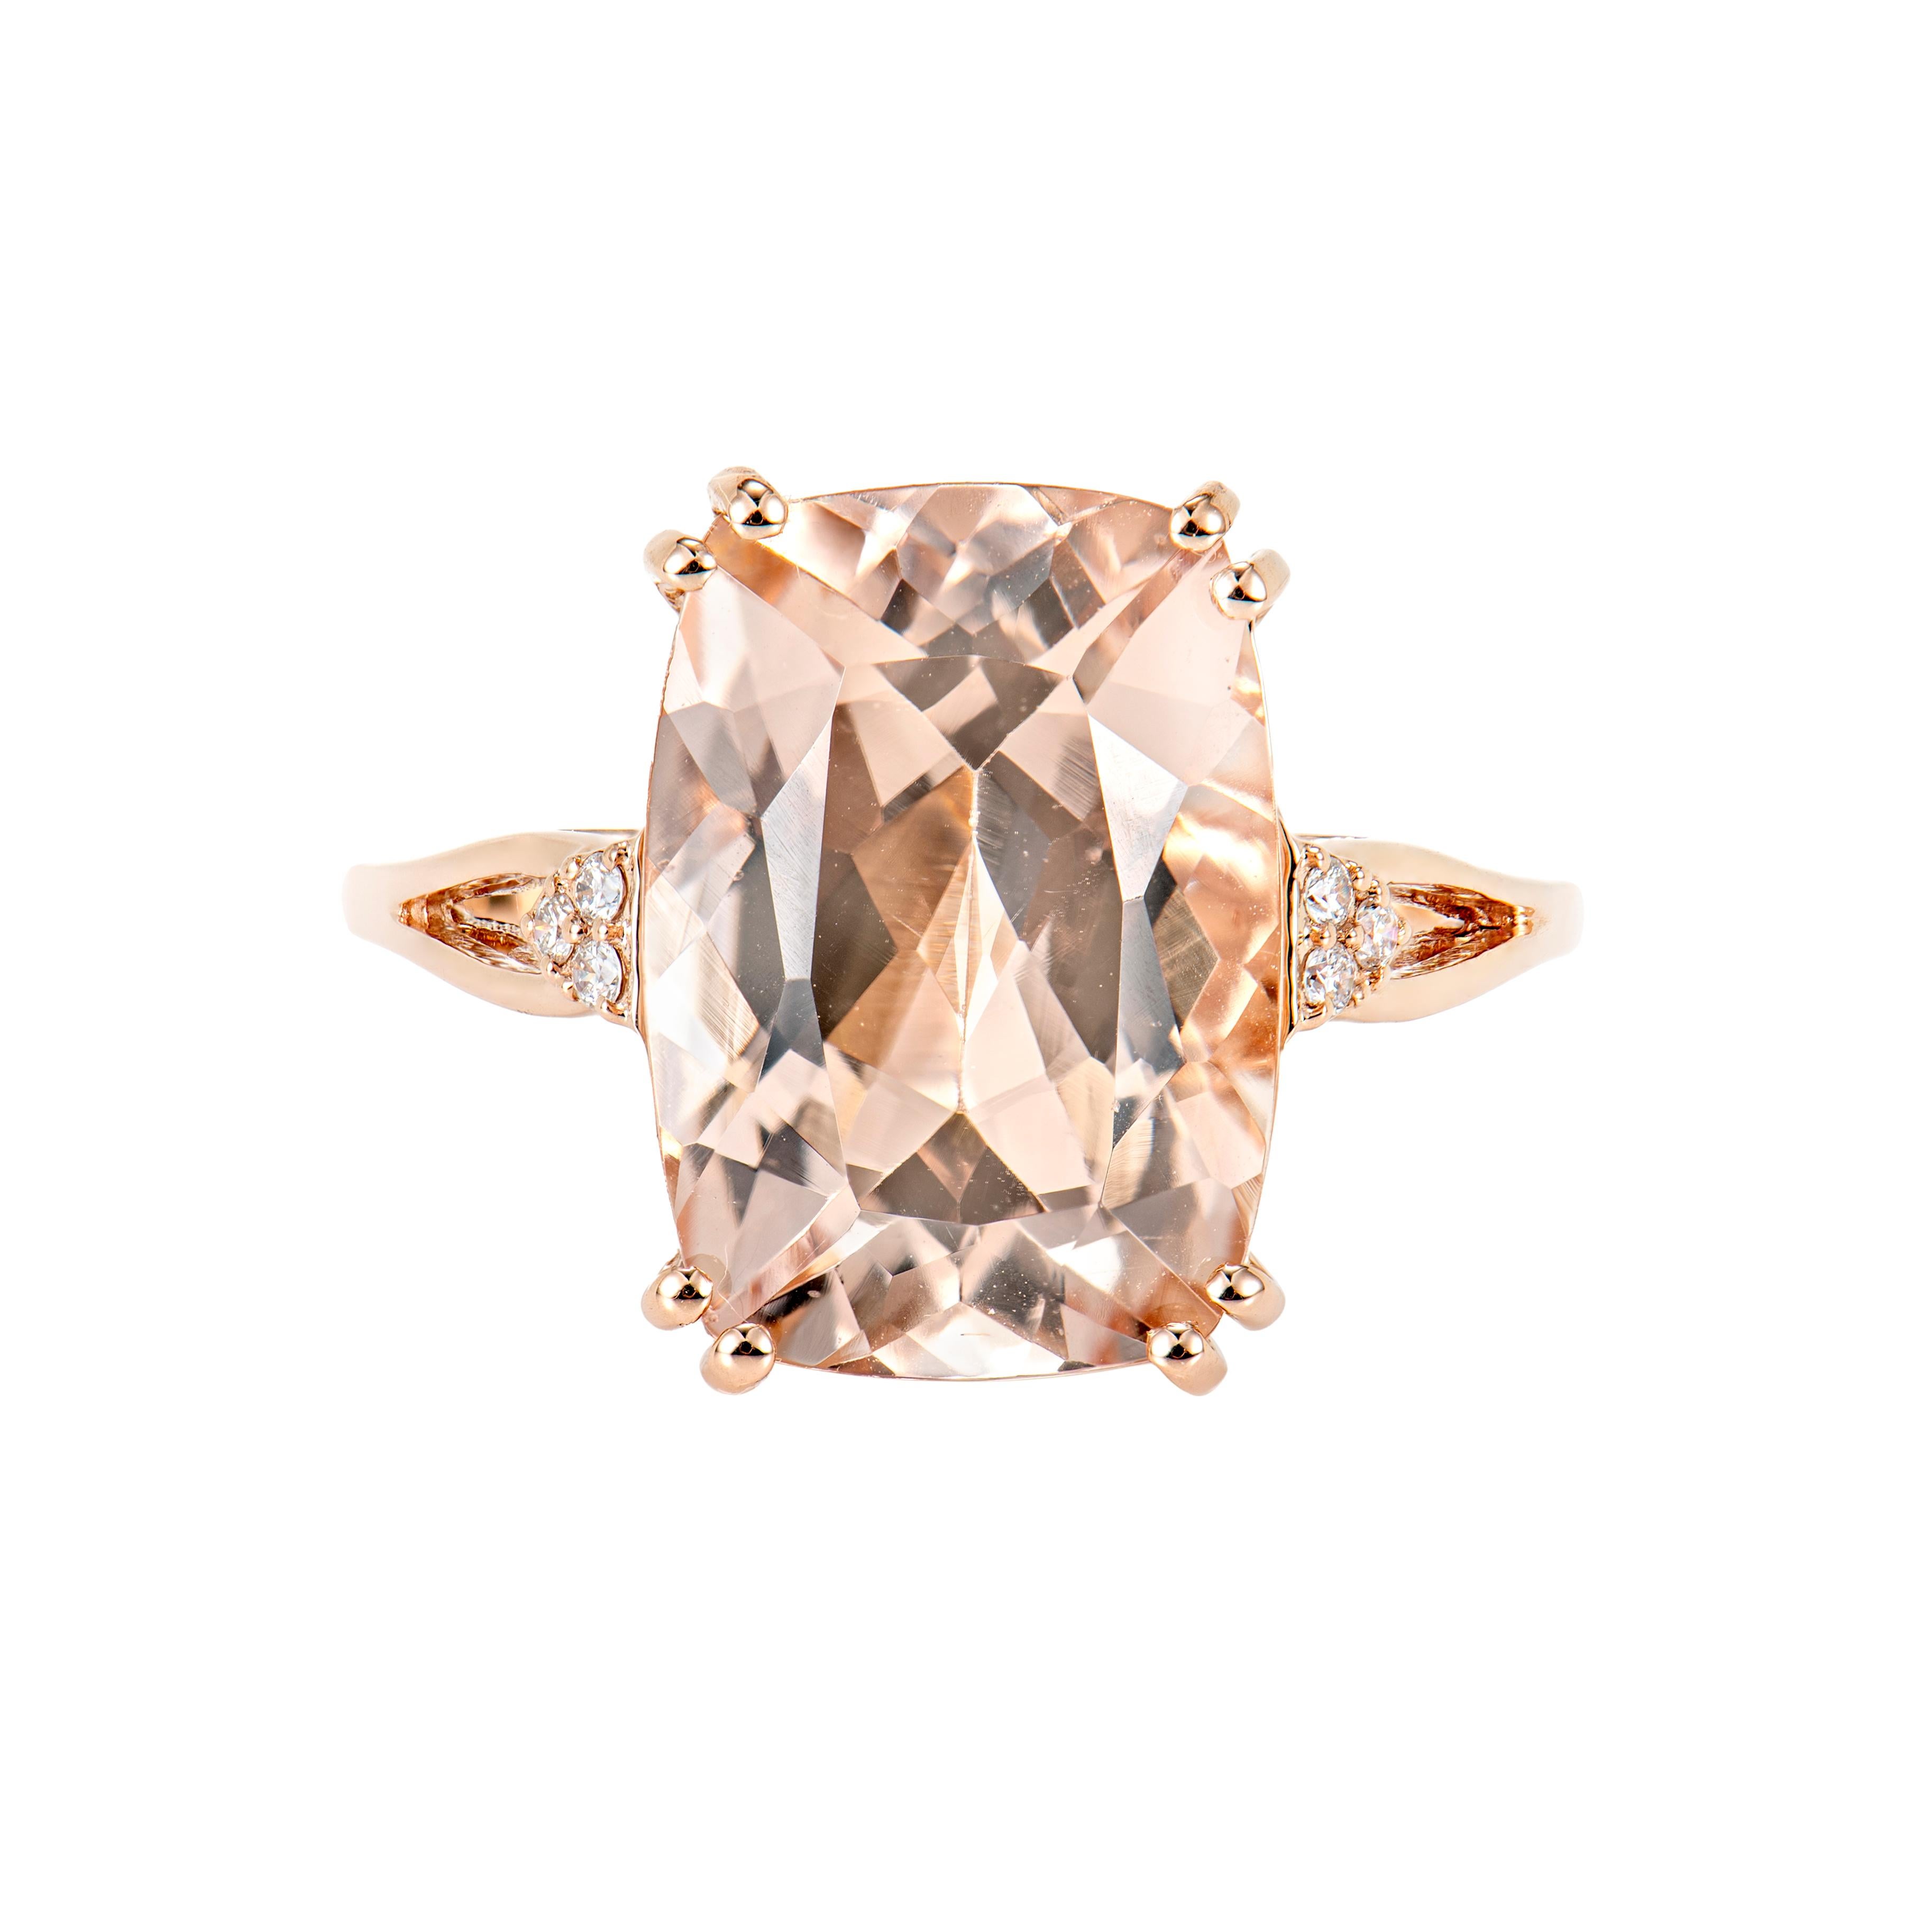 Contemporary 5.89 Carat Morganite Fancy Ring in 18Karat Rose Gold with White Diamond.   For Sale